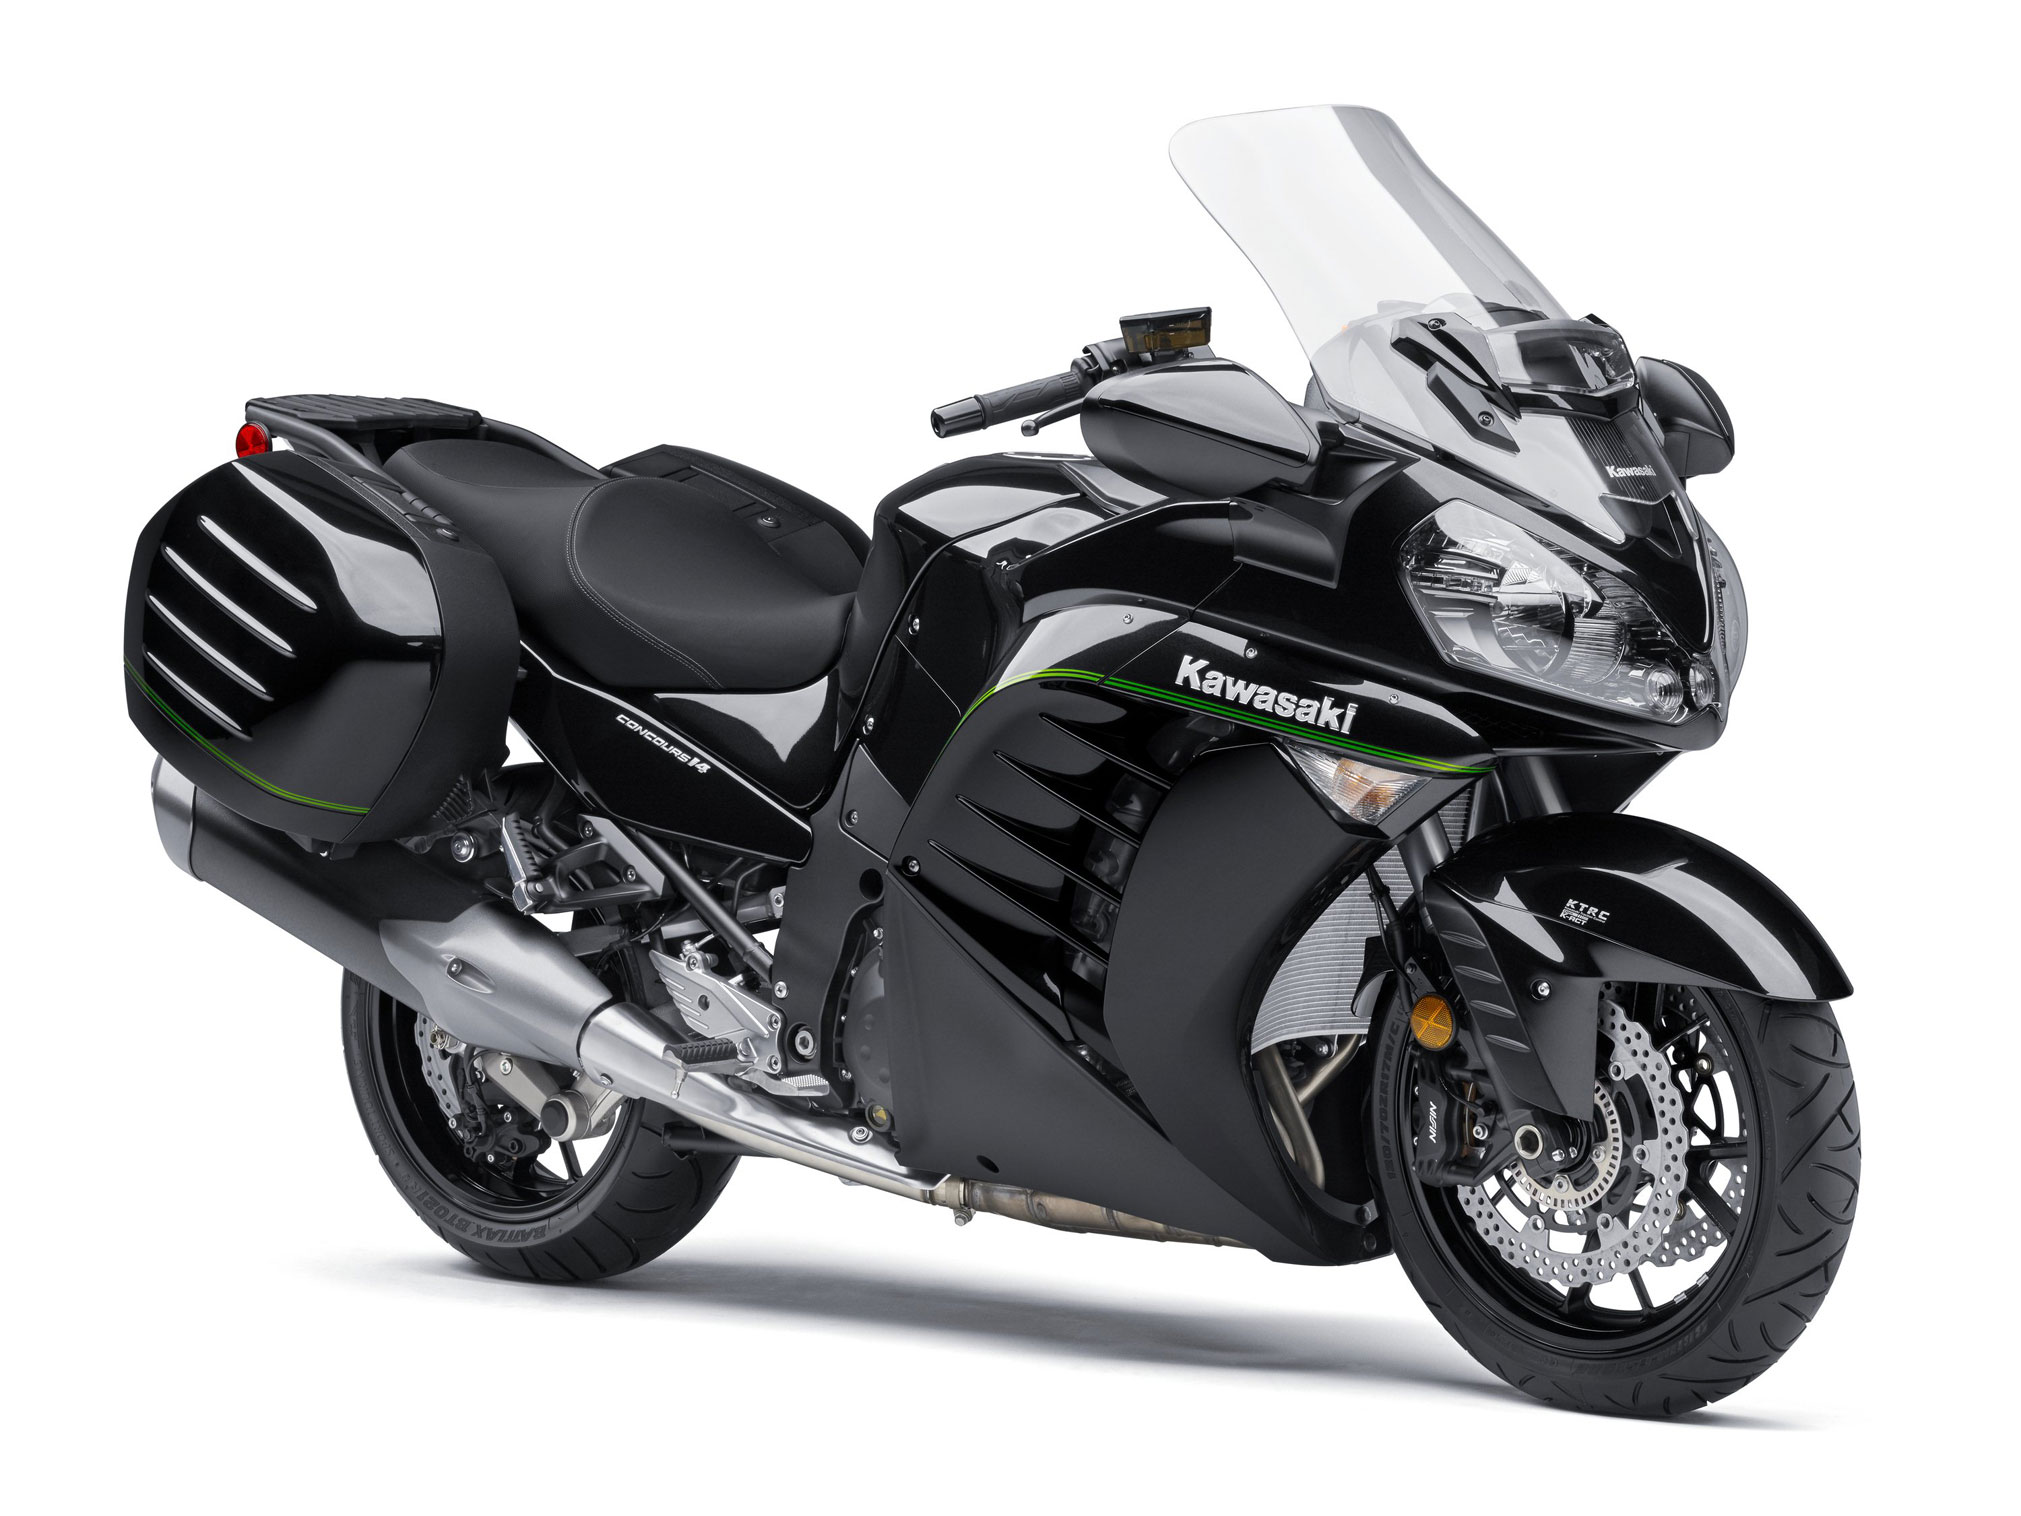 2022 Kawasaki  Concours 14 ABS Guide  Total Motorcycle